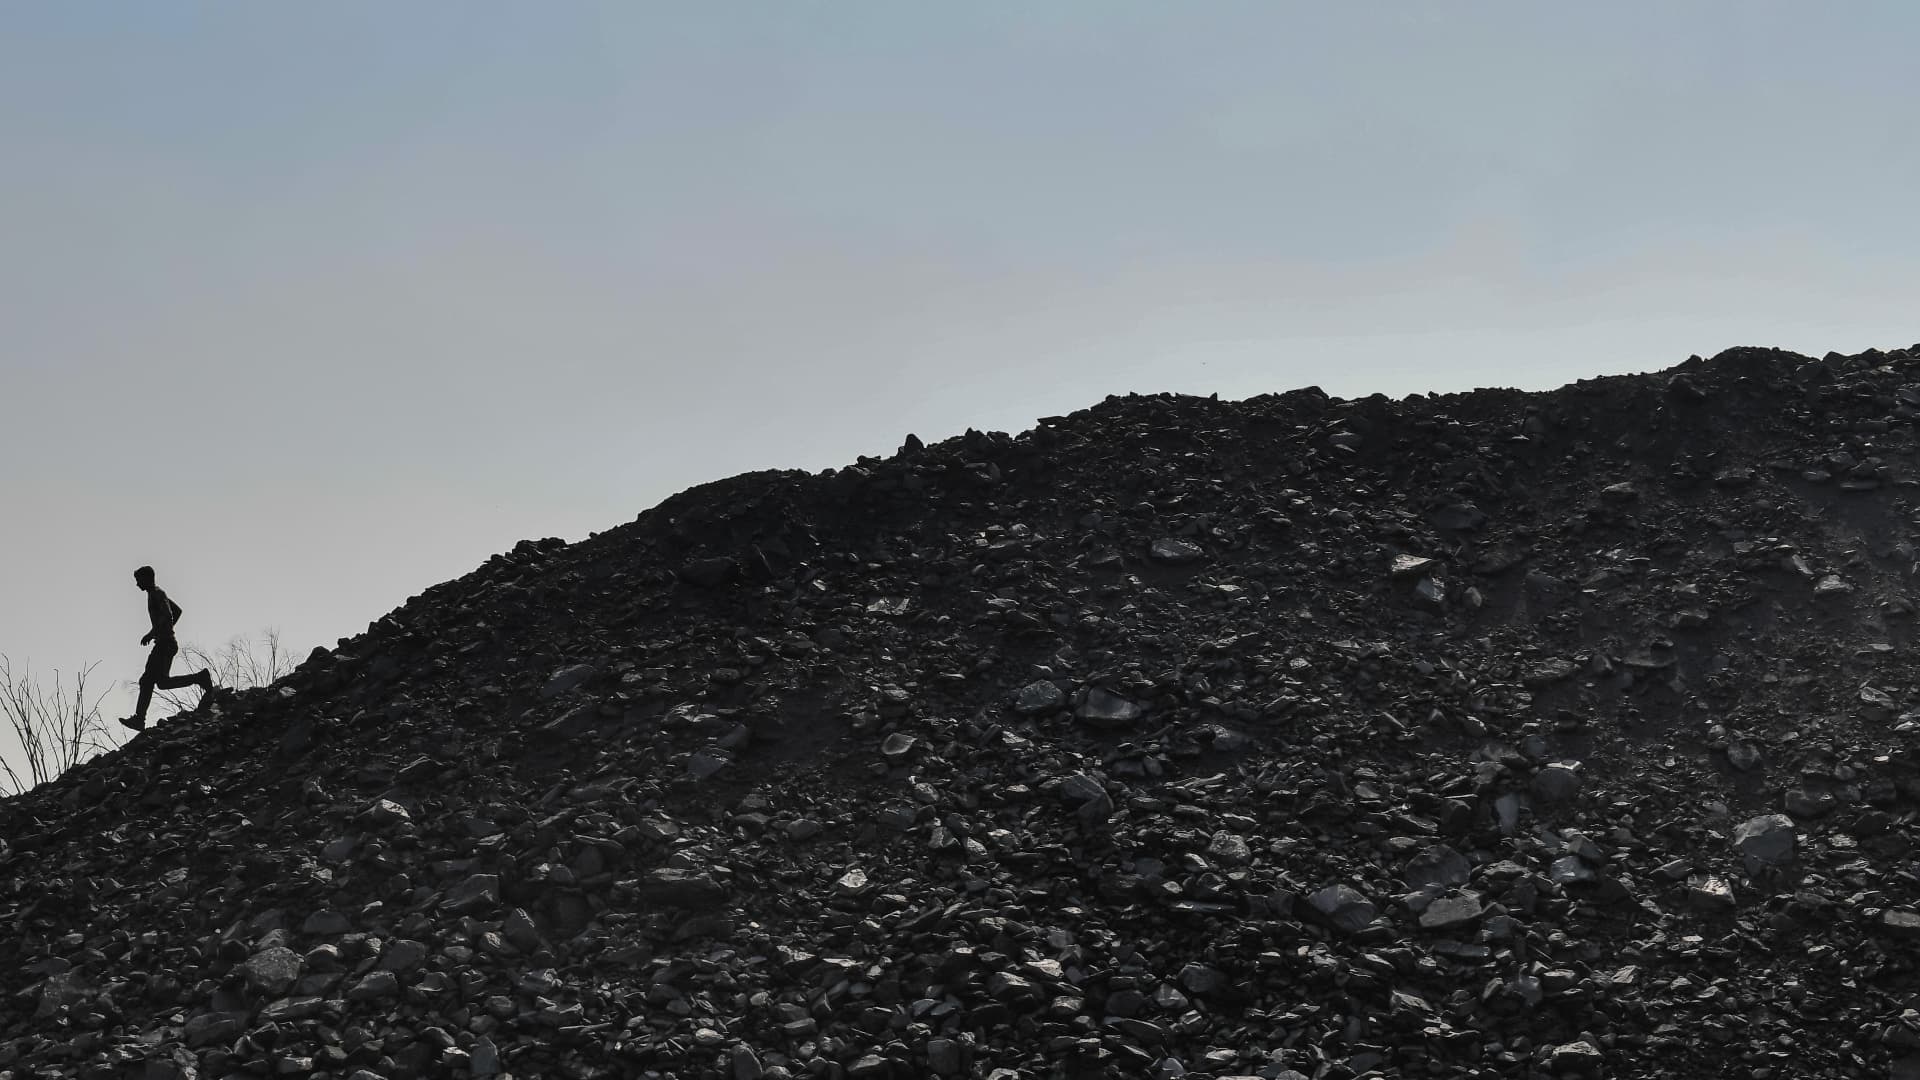 A worker walks atop a pile of coal at a coal yard near a mine on November 23, 2021 in India. Russian and Indian officials met last week hoping to resolve coking coal supply issues, a trade source and an Indian government source said, according to Reuters.